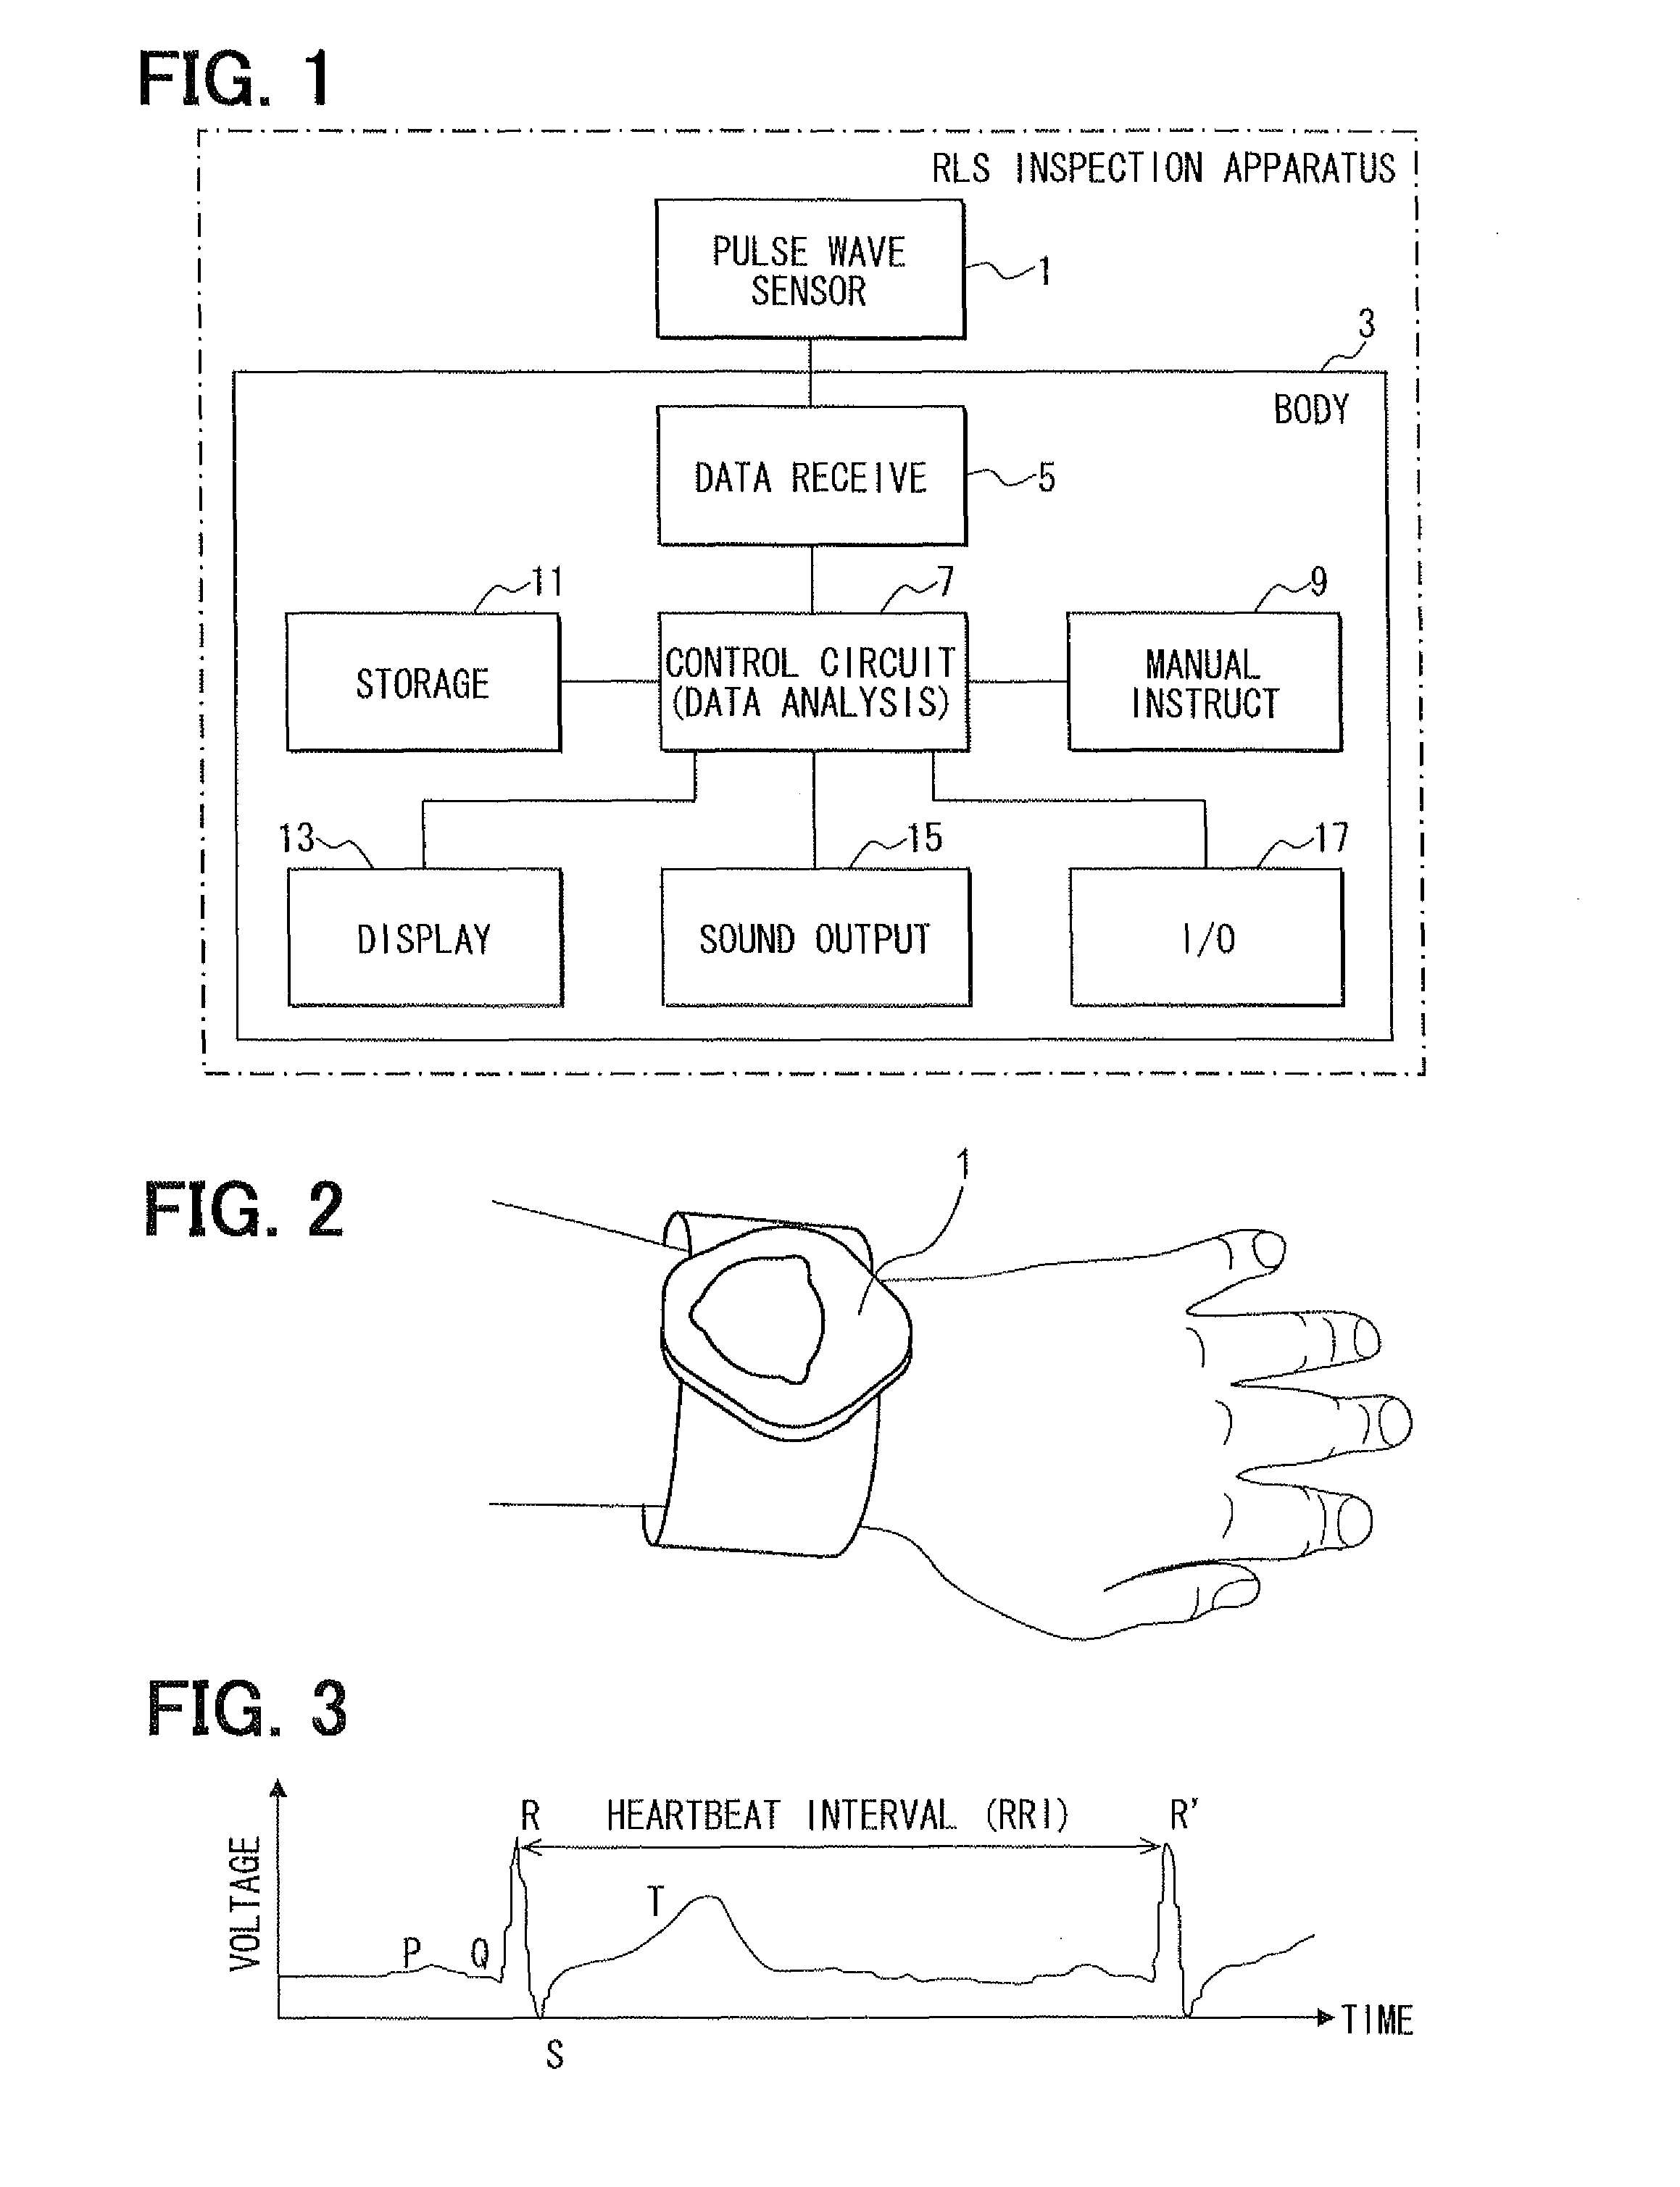 Living body inspection apparatus, and relevant method and program product